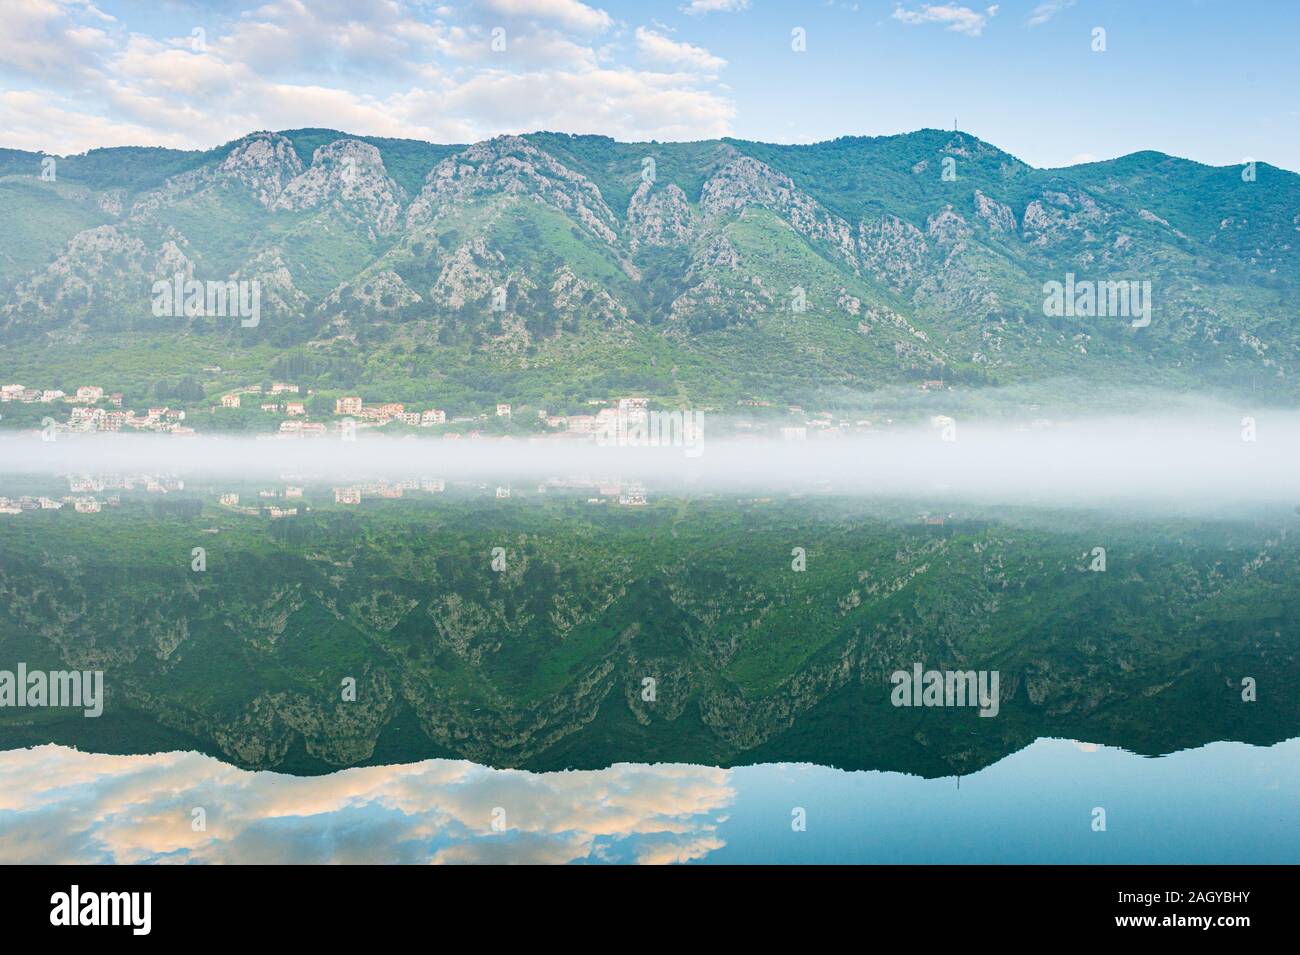 A view of the Bay of Kotor from the village of Dobrota towards the mountains of Myo and Prcanj, Montenegro. Stock Photo